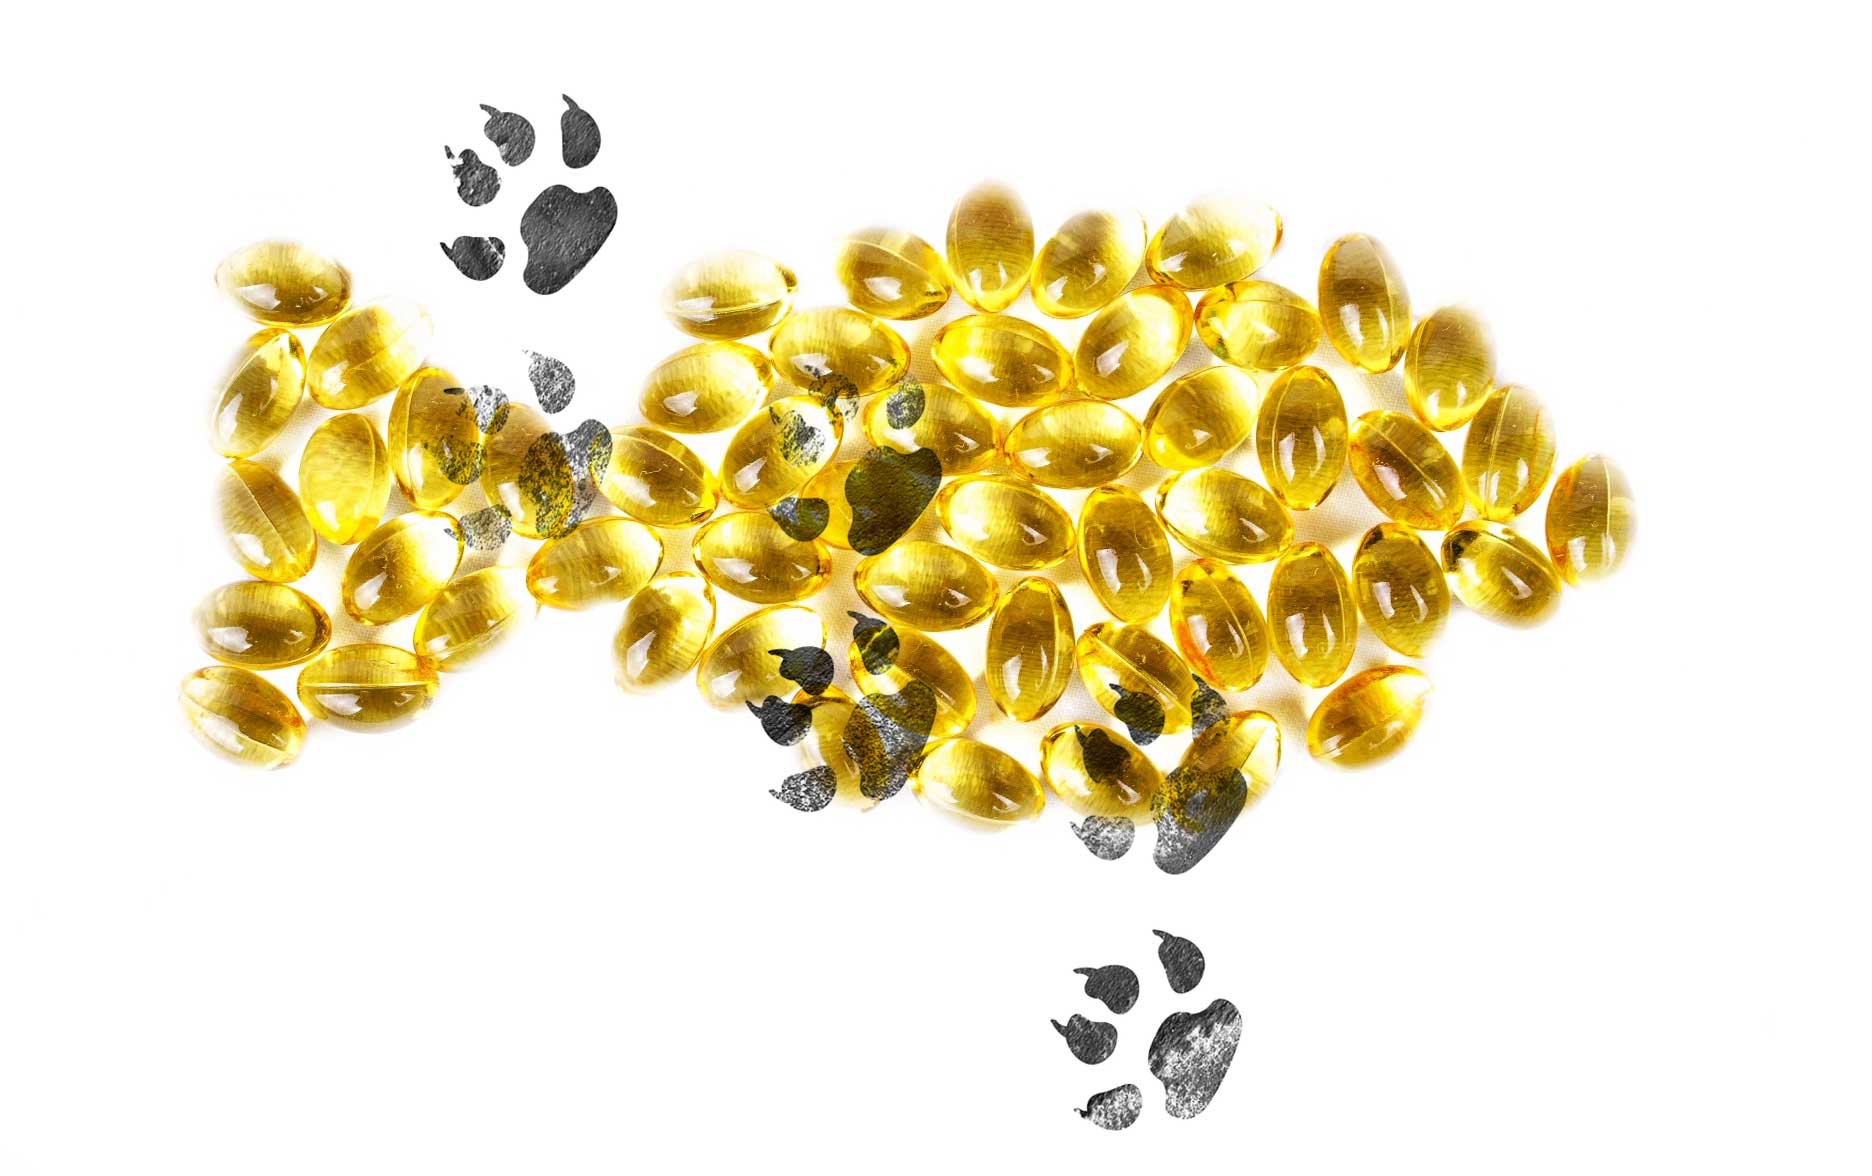  killed my dog with fish oil